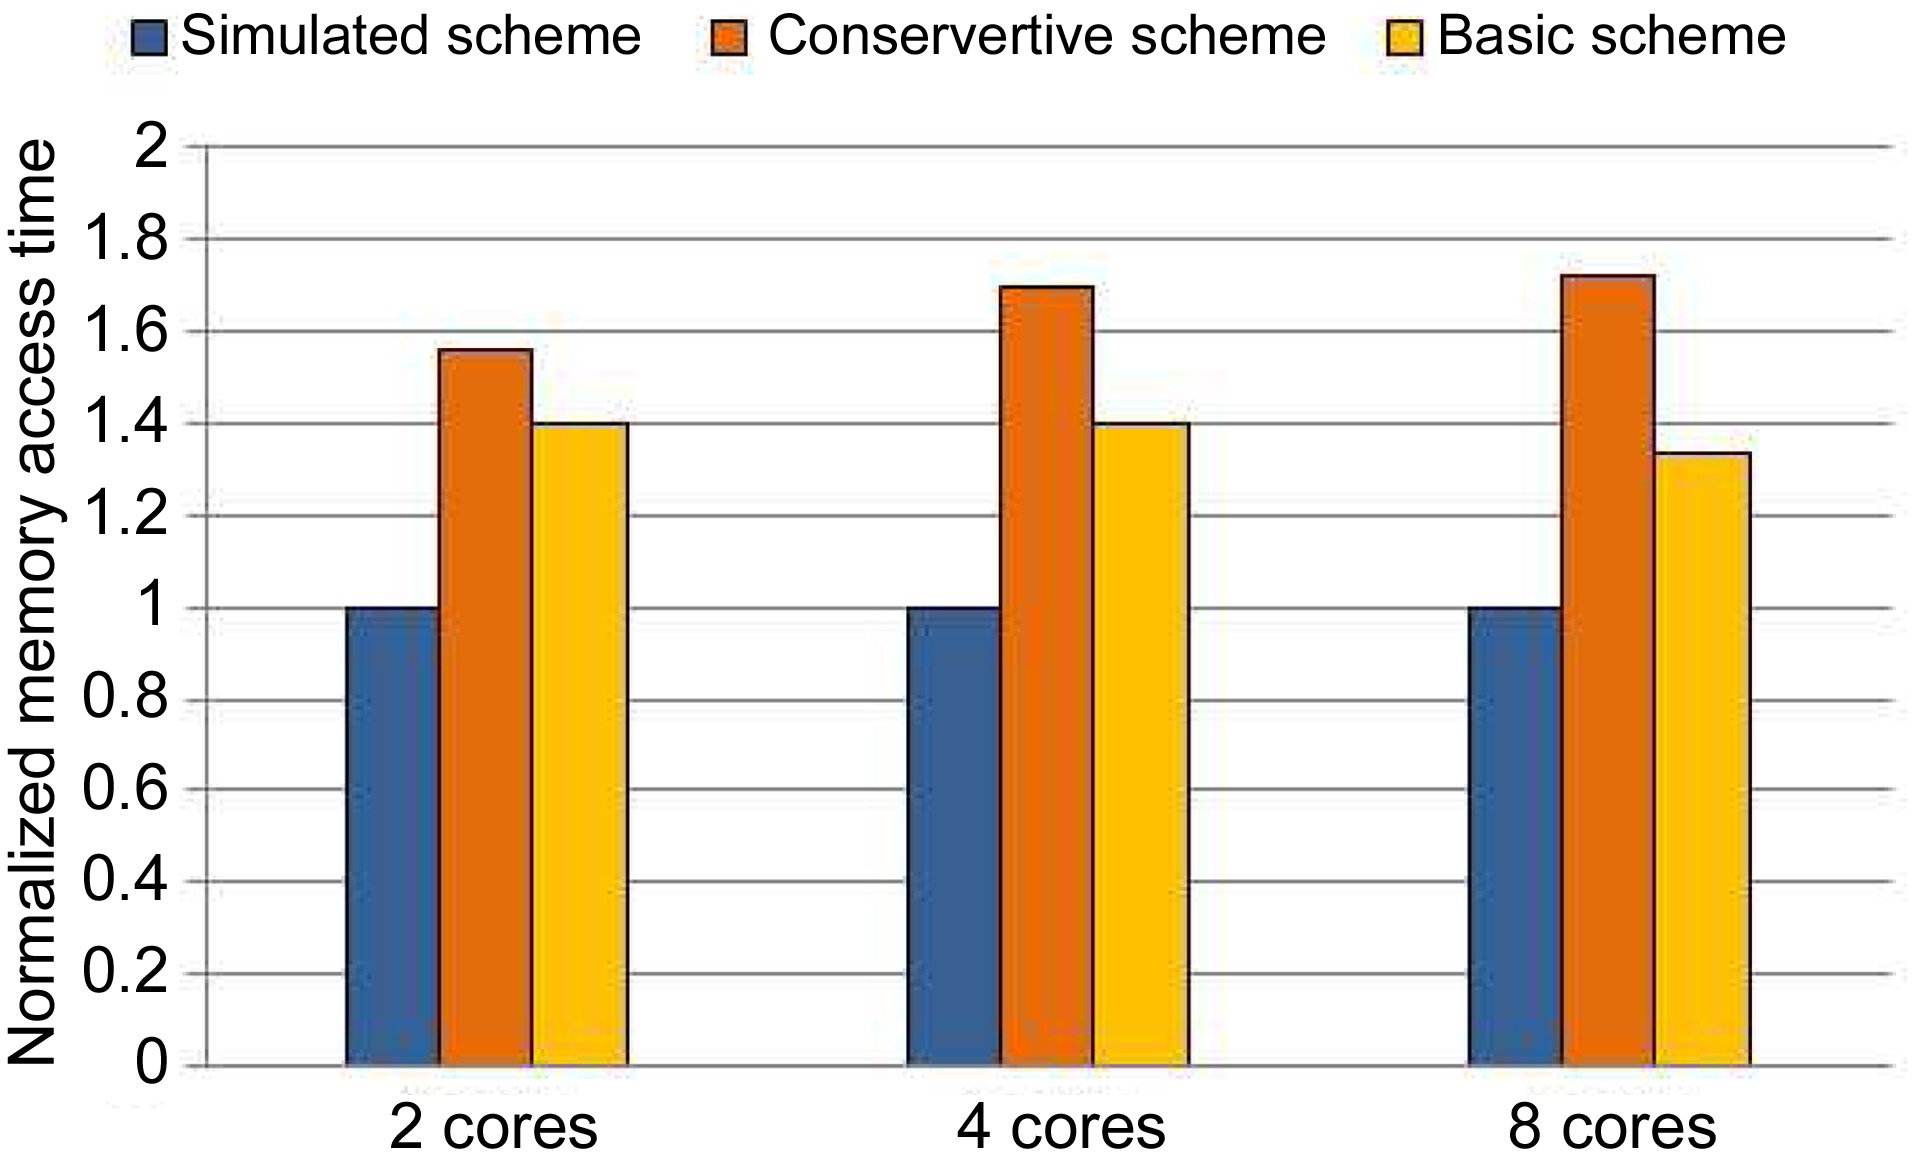 The comparison of the averaged memory access time of the conservative scheme and the basic scheme normalized with that of the simulated scheme in case of 2 cores, 4 cores and 8 cores.